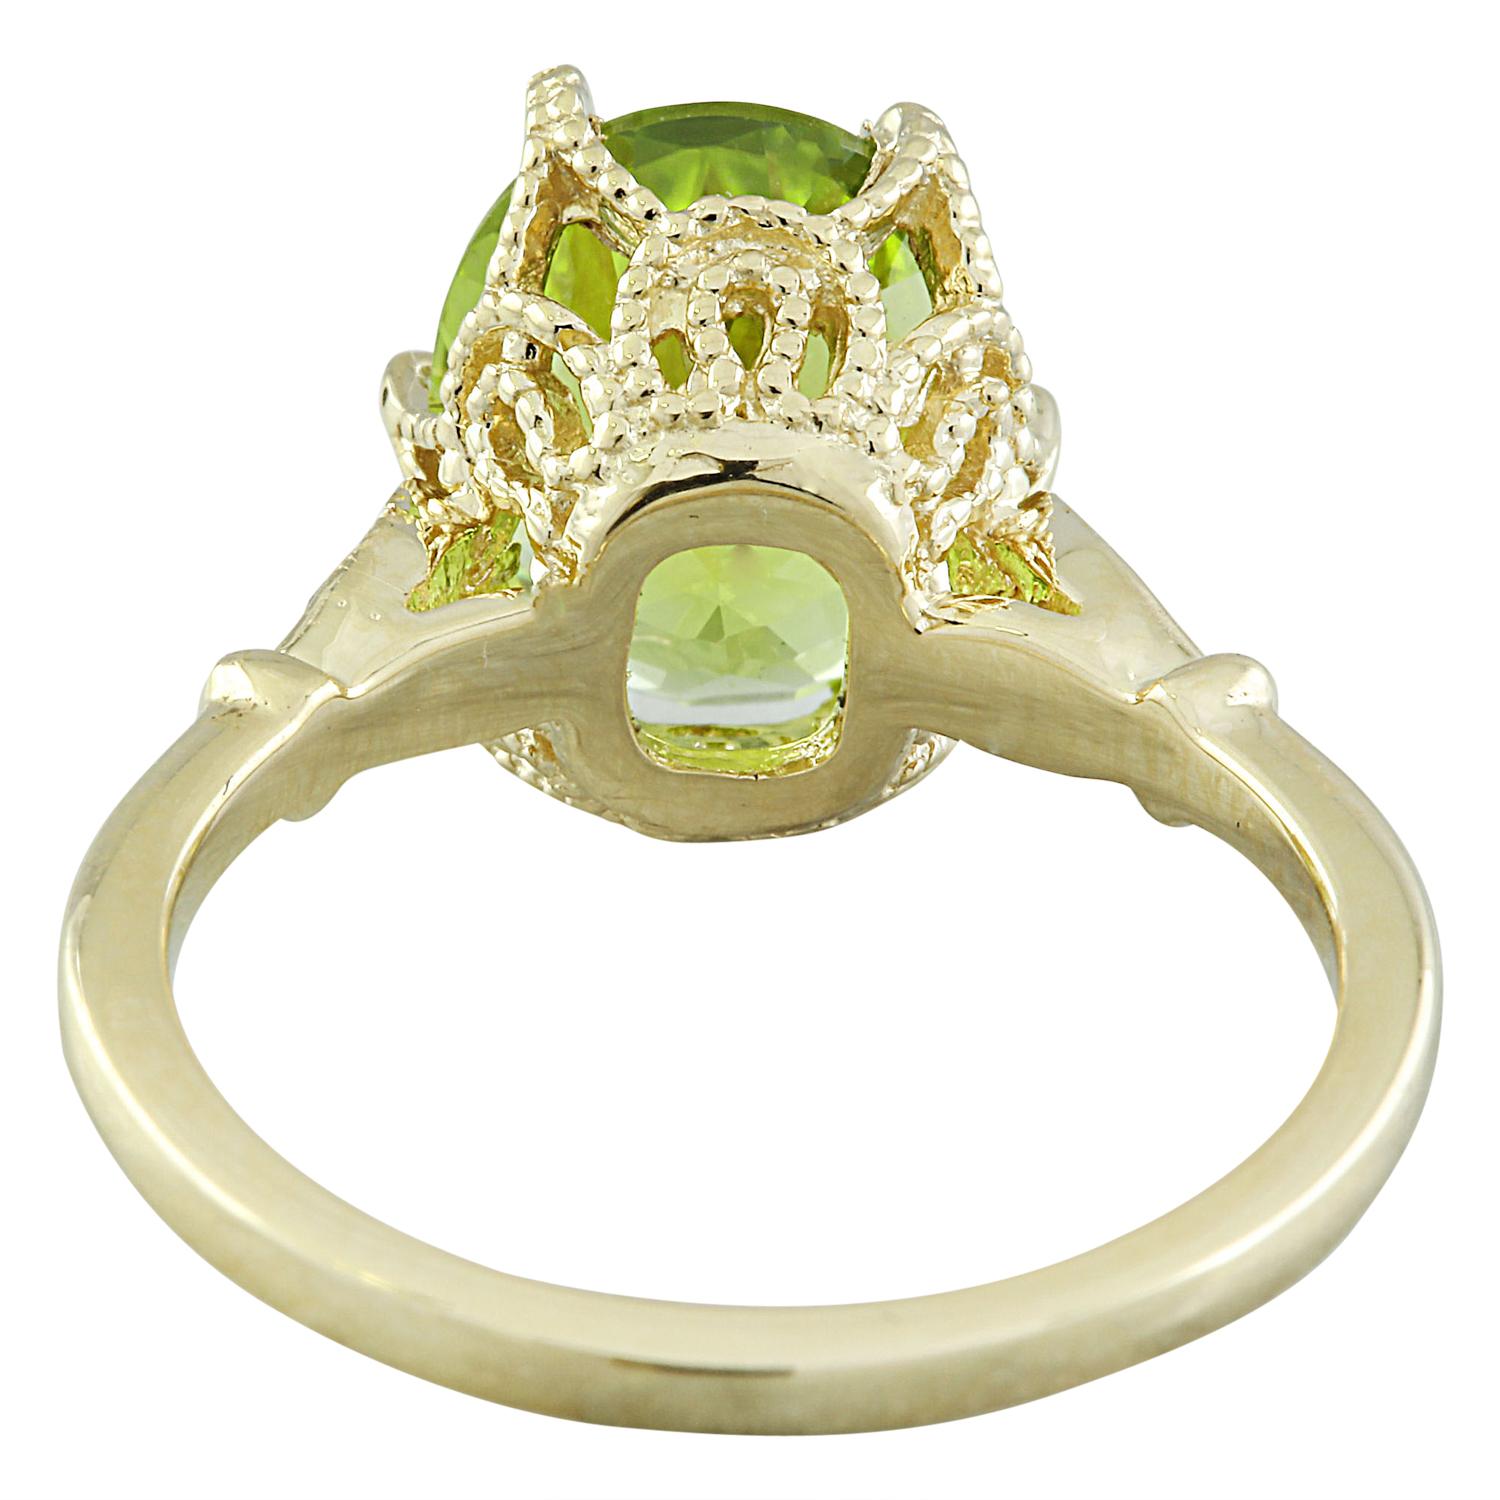 Natural Peridot Diamond Ring In 14 Karat Yellow Gold In New Condition For Sale In Los Angeles, CA